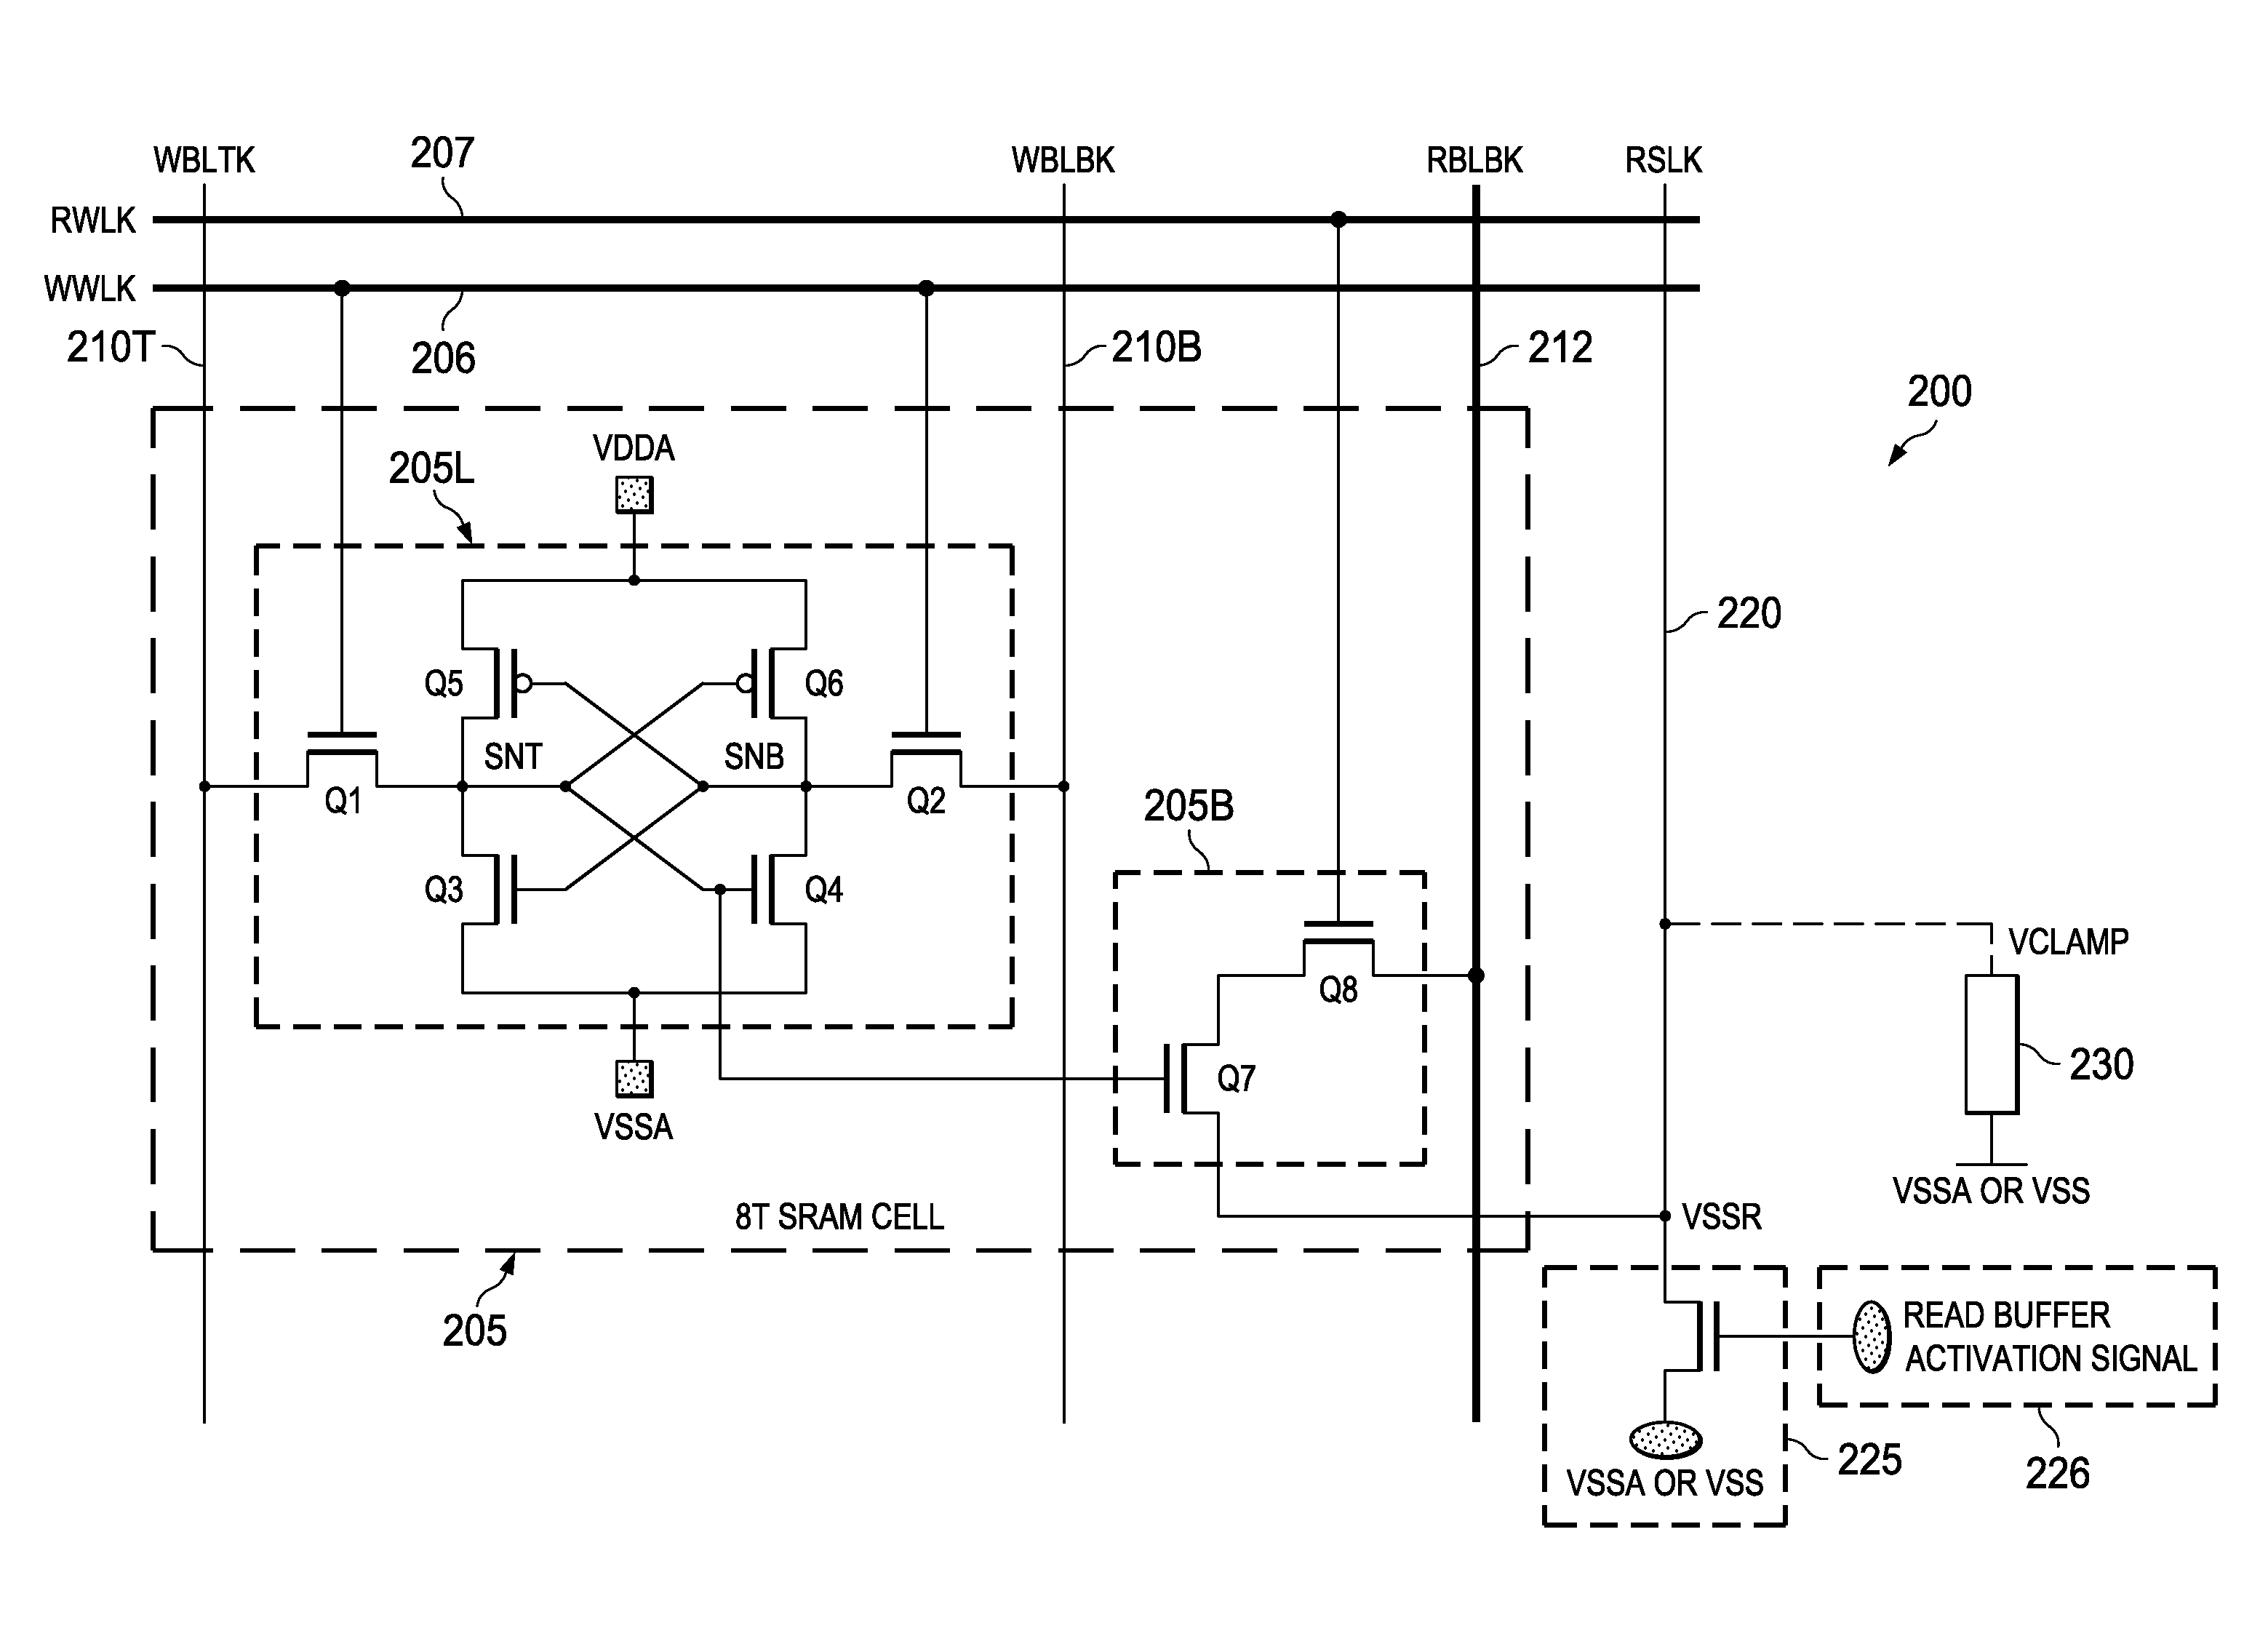 SRAM cell with read buffer controlled for low leakage current